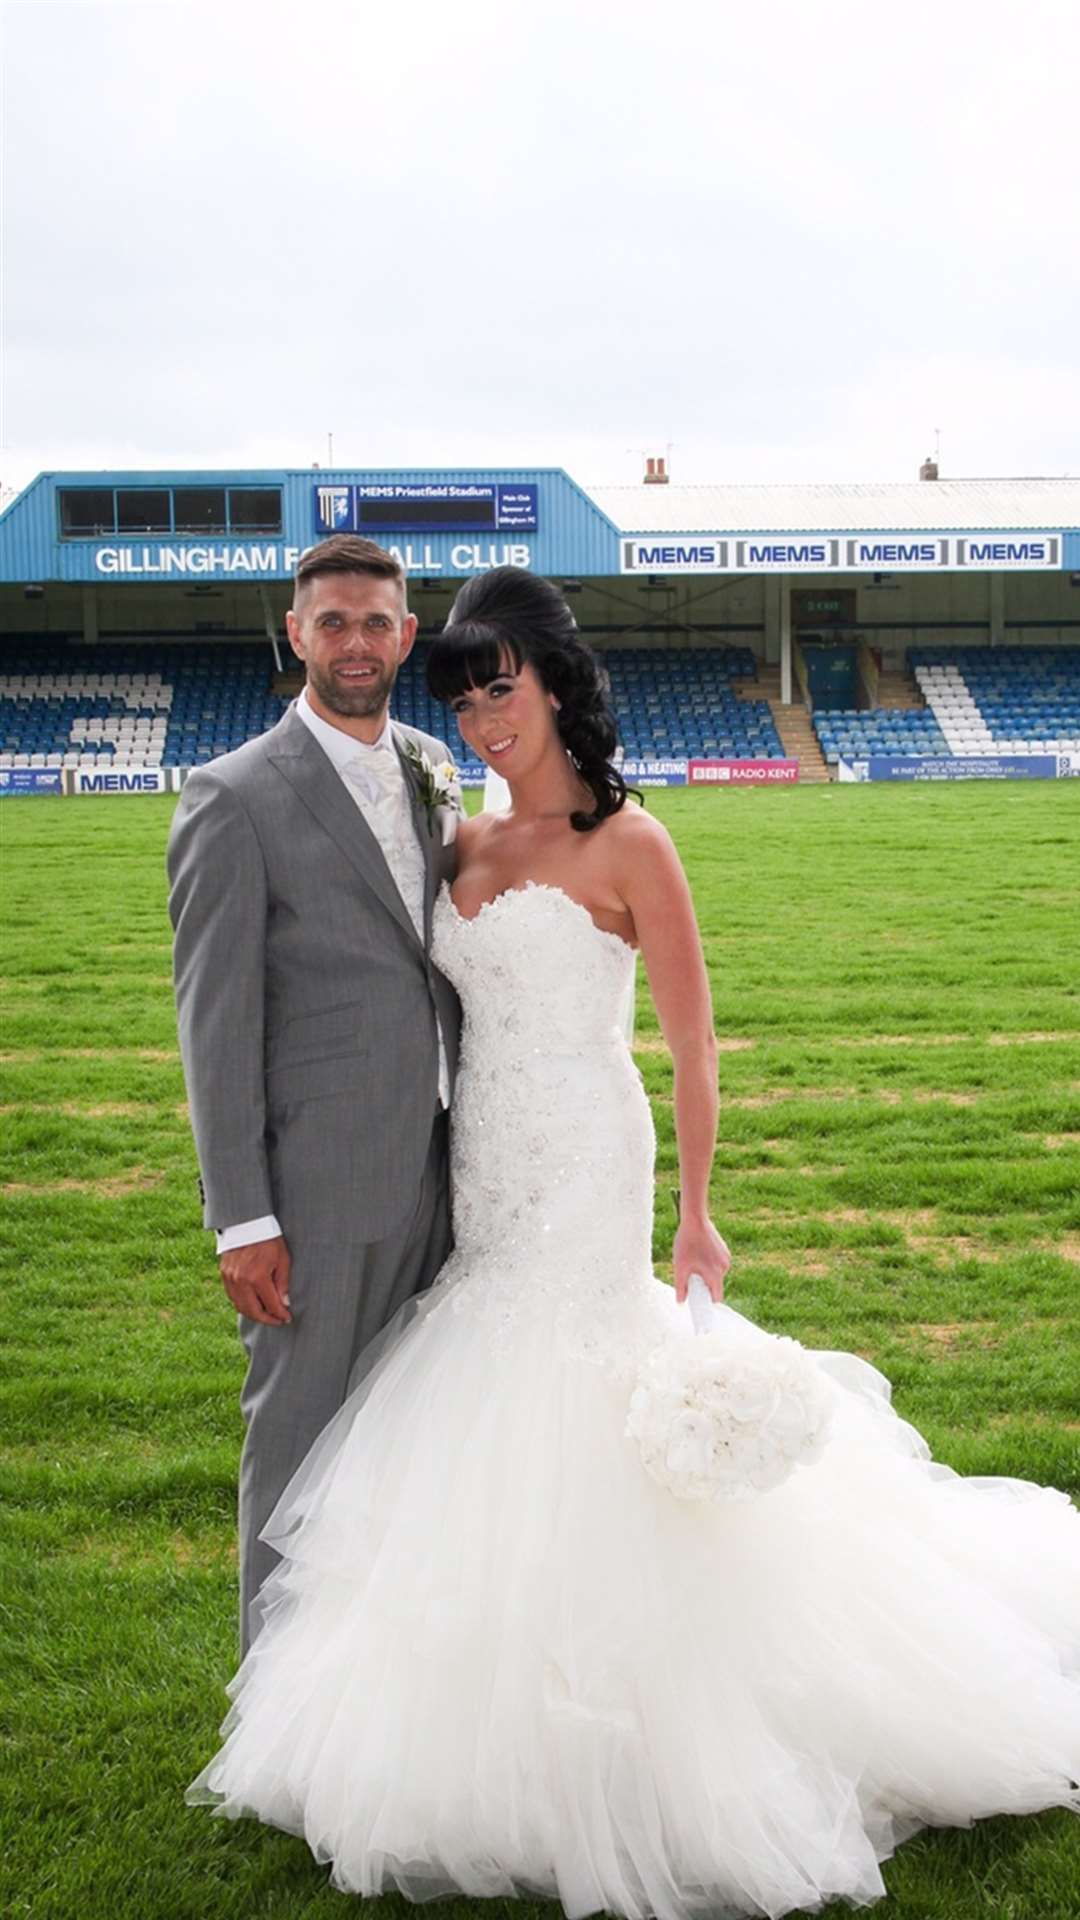 Danielle and Daniel held their wedding reception at the ground